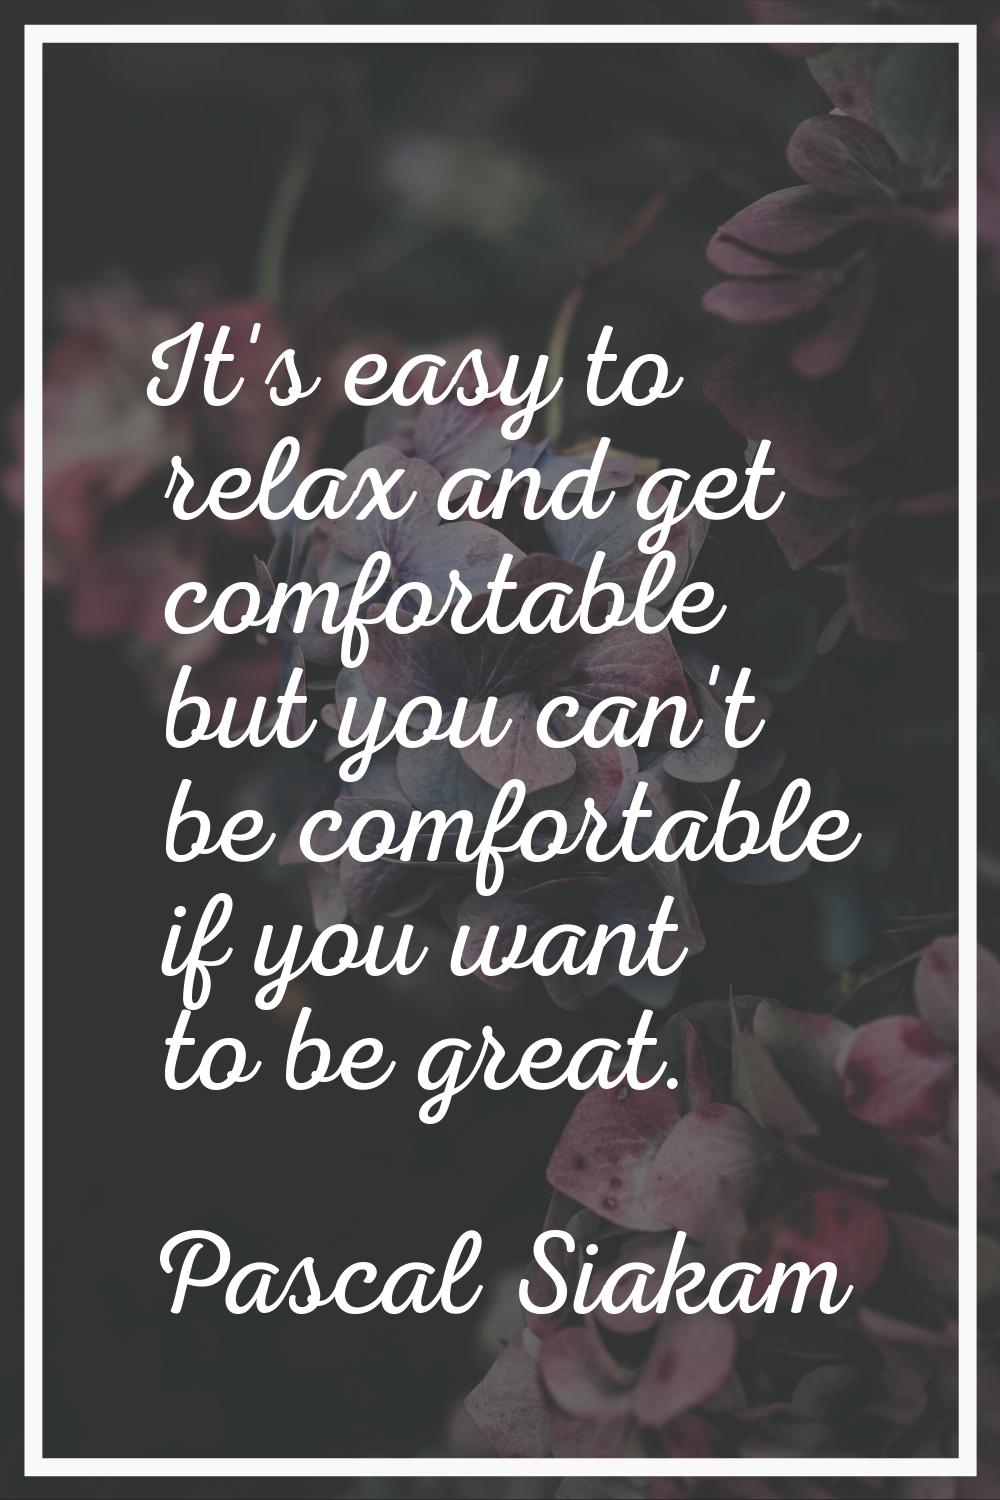 It's easy to relax and get comfortable but you can't be comfortable if you want to be great.